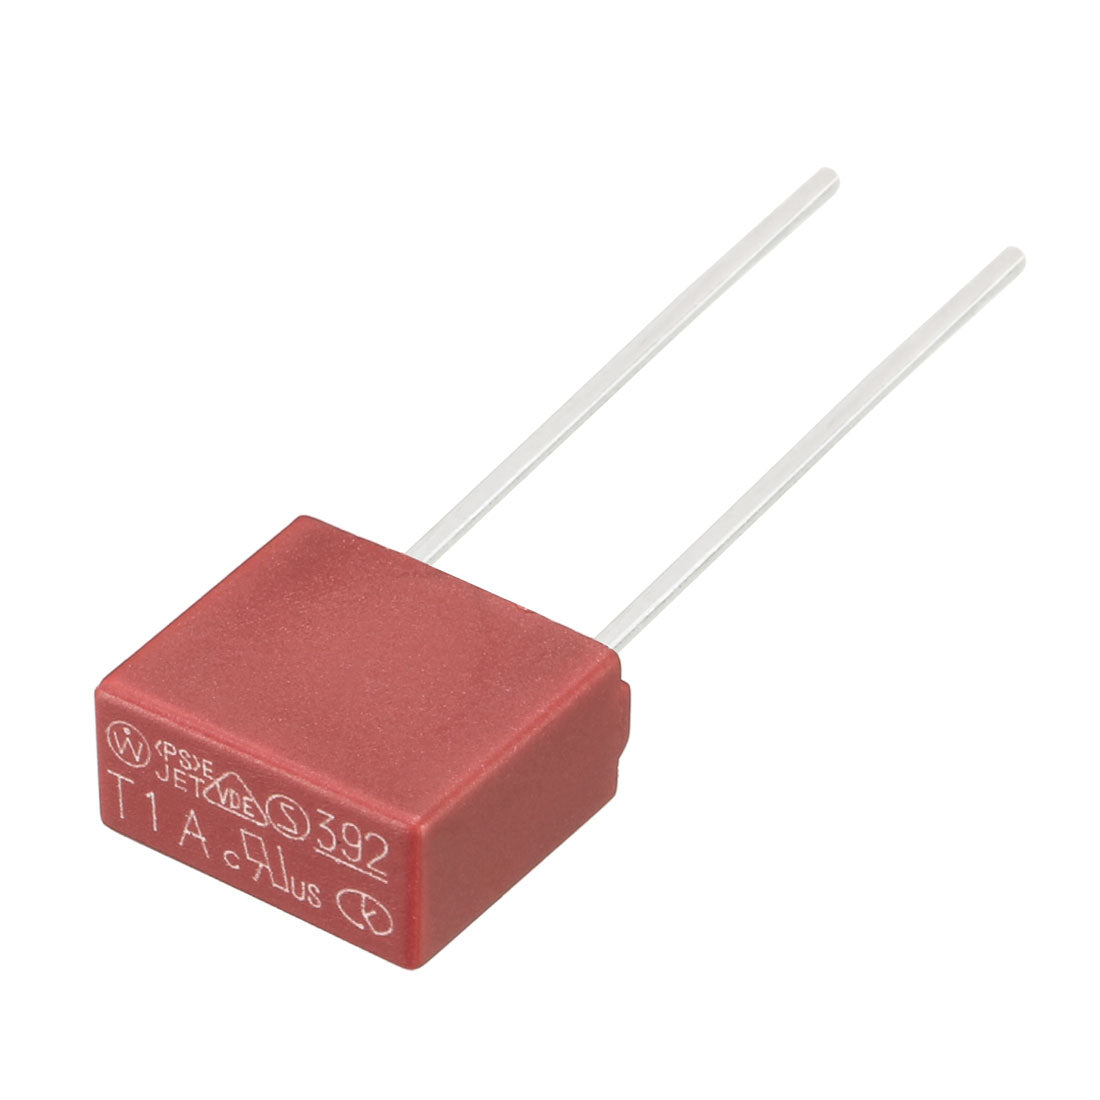 uxcell Uxcell 10Pcs DIP Mounted Miniature Square Slow Blow Micro Fuse T1A 1A 250V Red